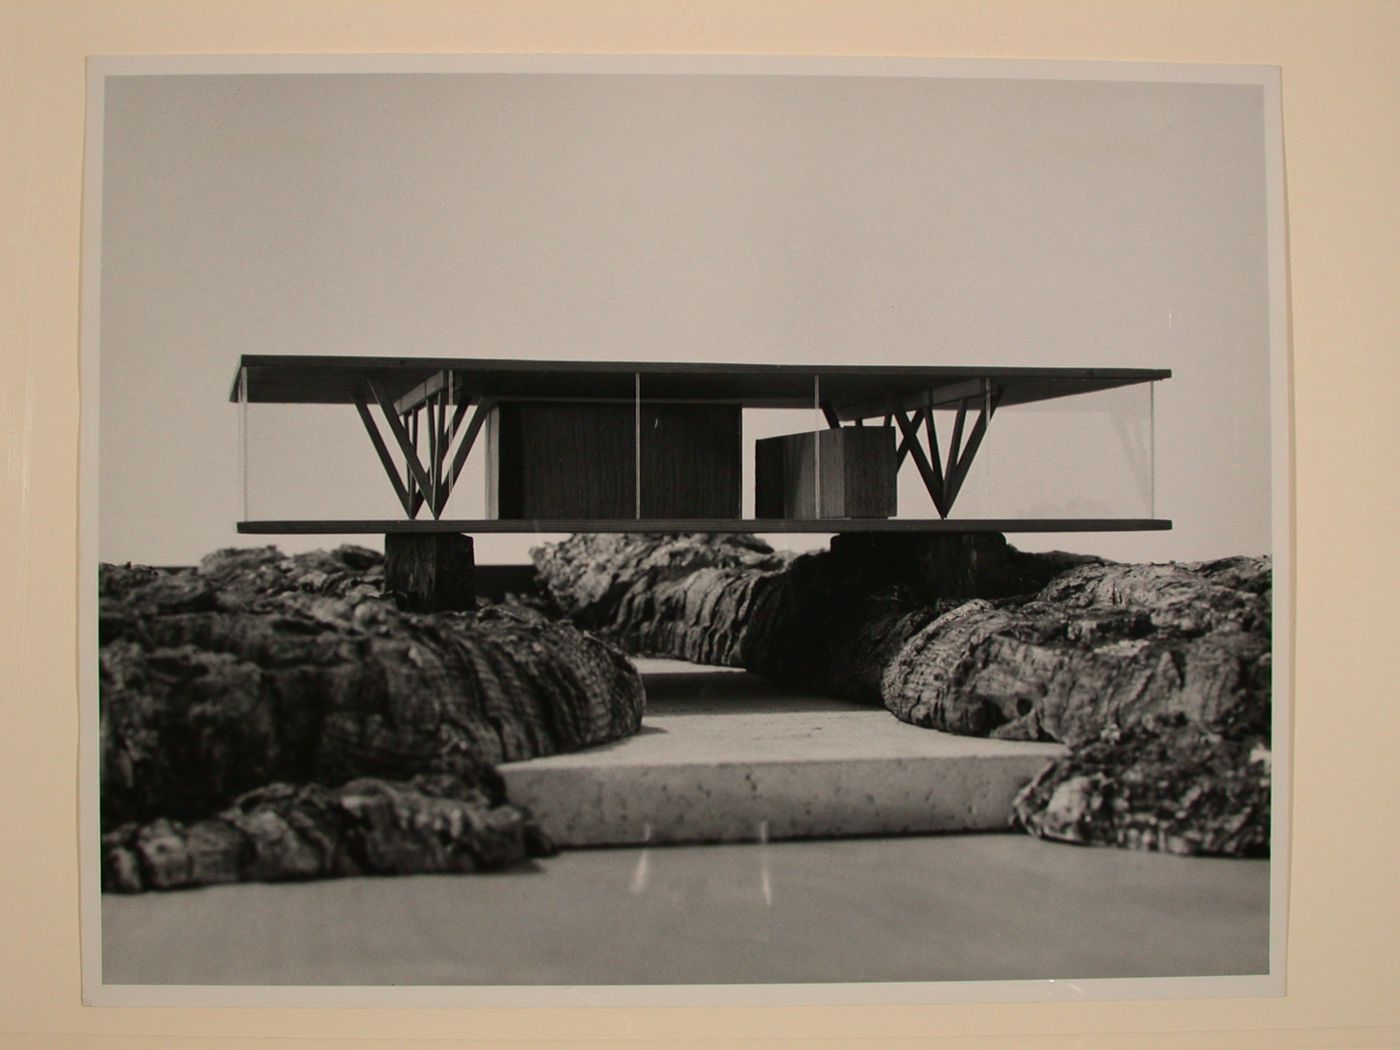 Photograph of a model for a Canyon House with "V" timber columns